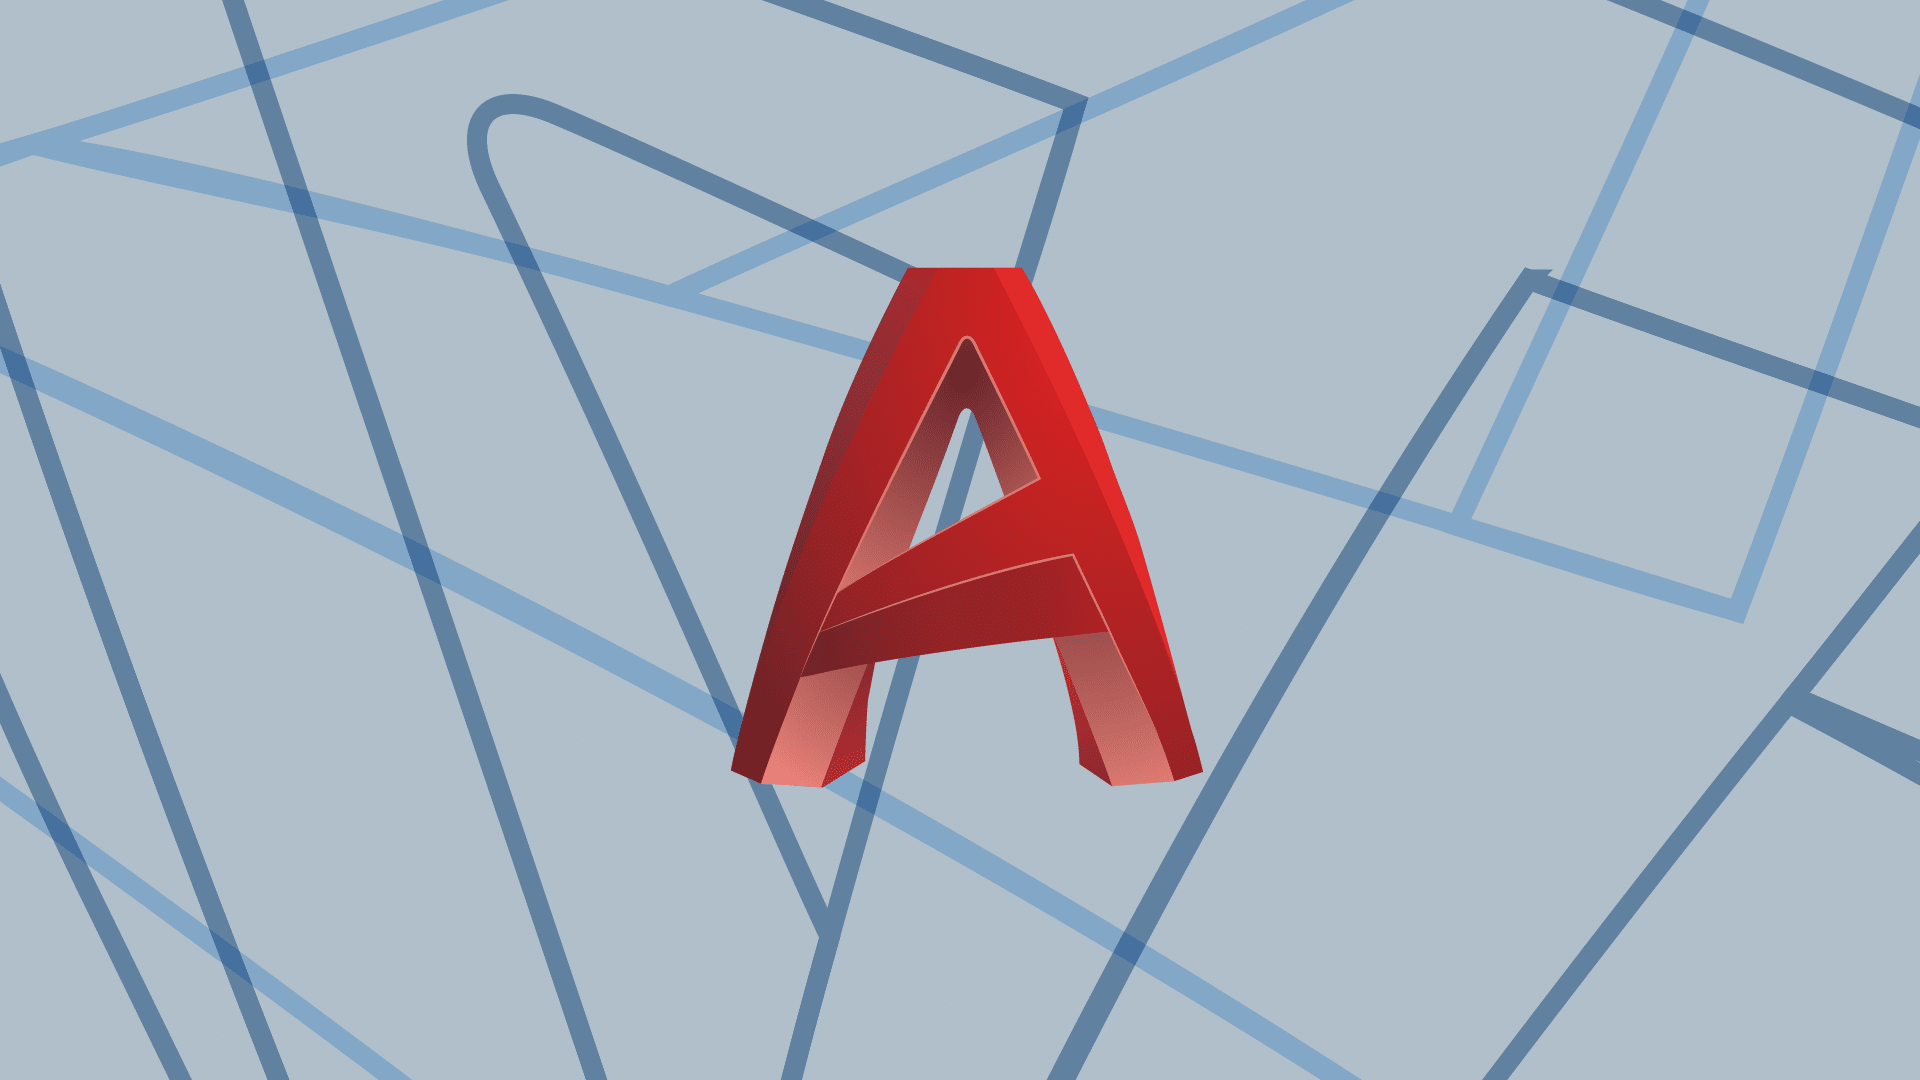 Autocad 2019 Download For Mac